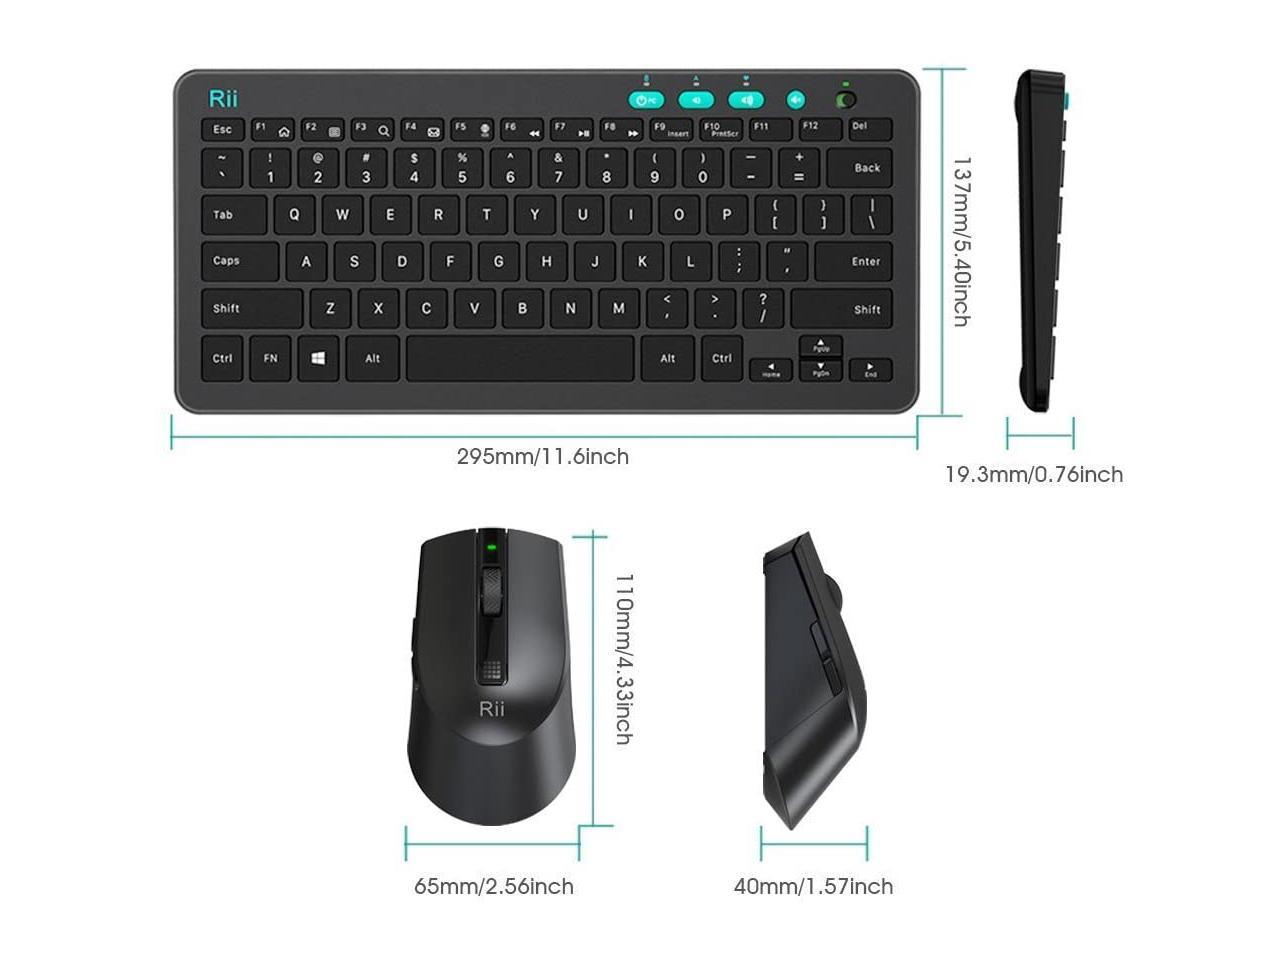 Rii RKM709 2.4Ghz Ultra-Slim Wireless Keyboard and Mouse Combo,Free Shipping 